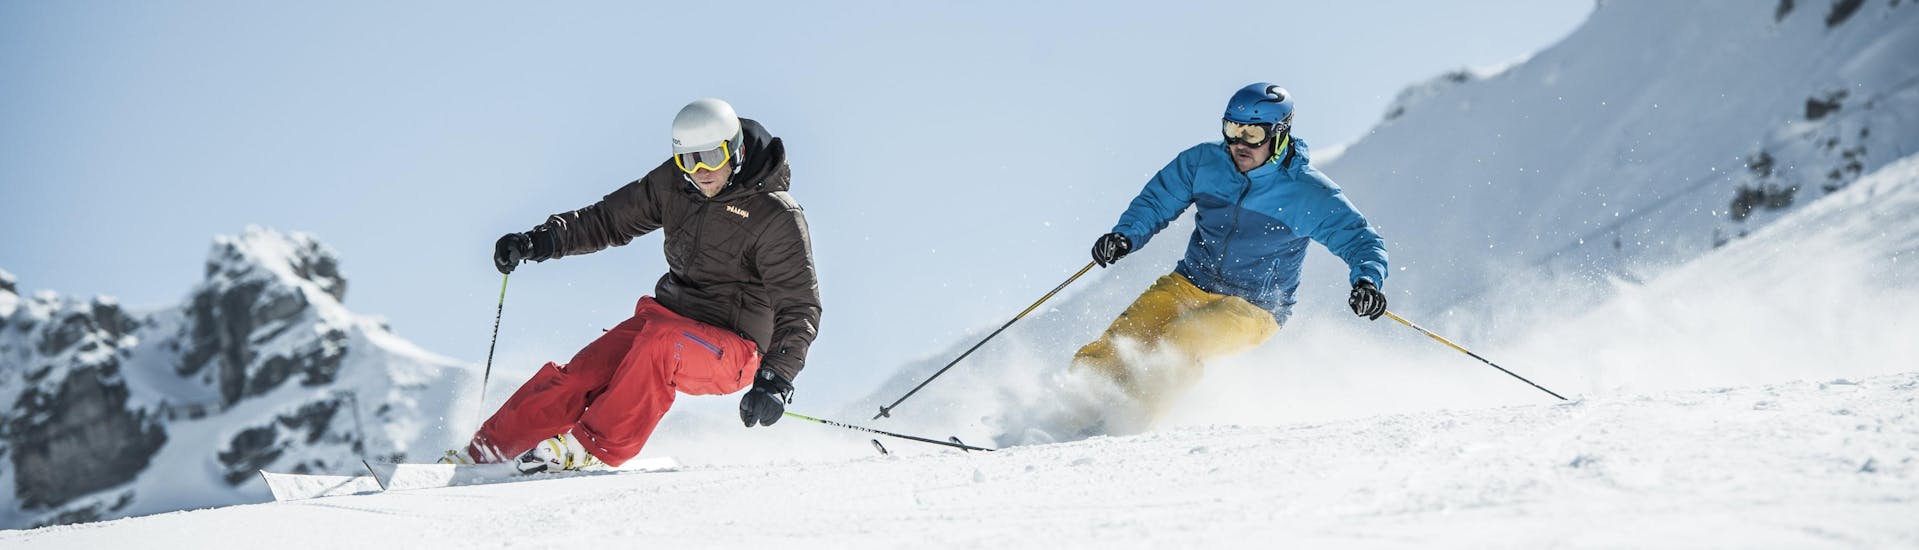 A skier practices the correct skiing technique during one of the private lessons in Vrchlabí – Kněžický vrch.